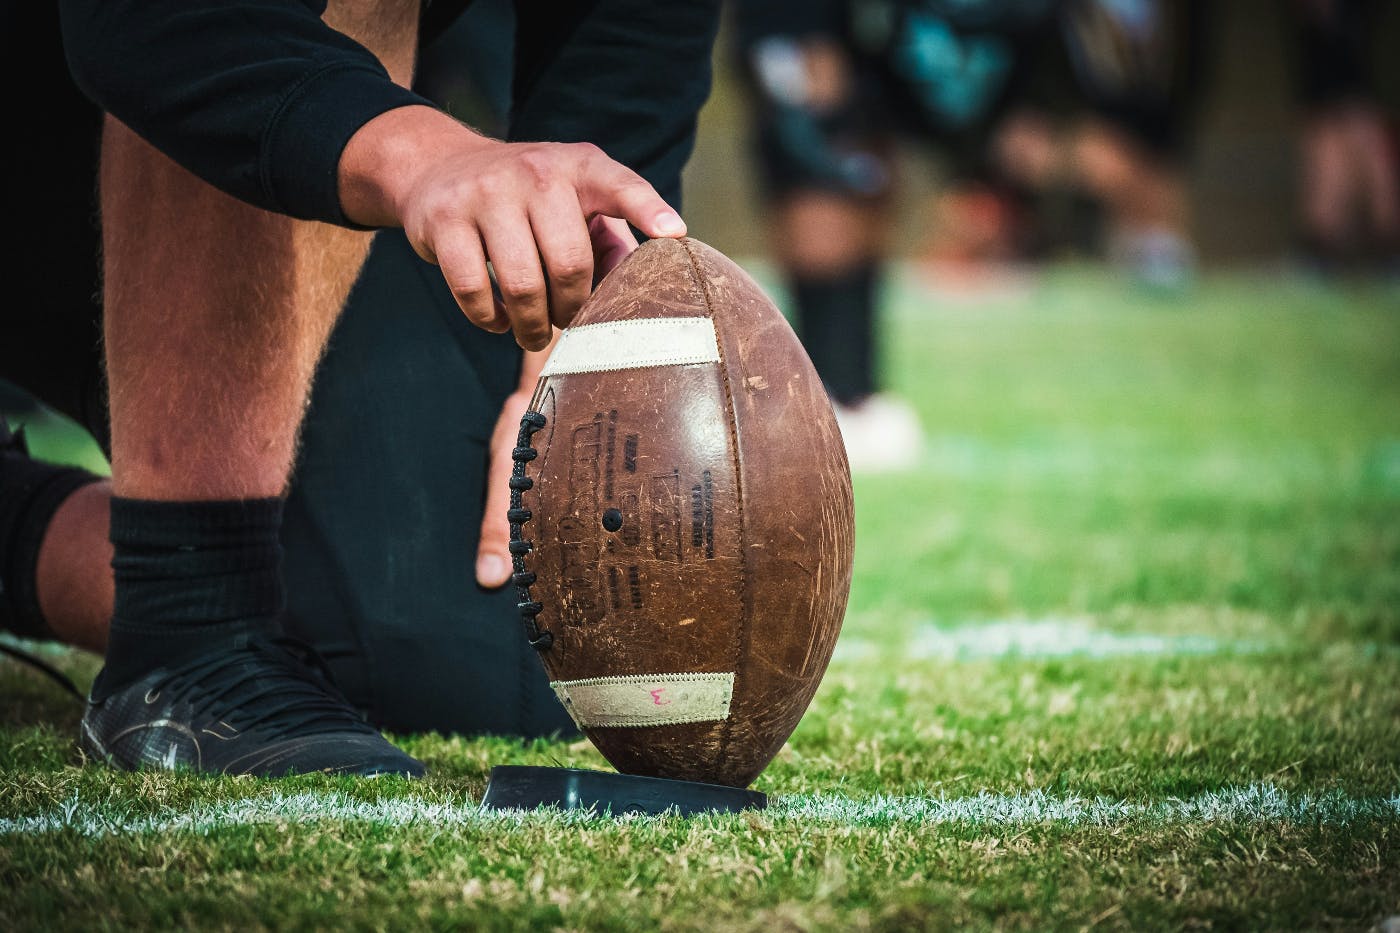 A man holding an American football in position for a kick-off